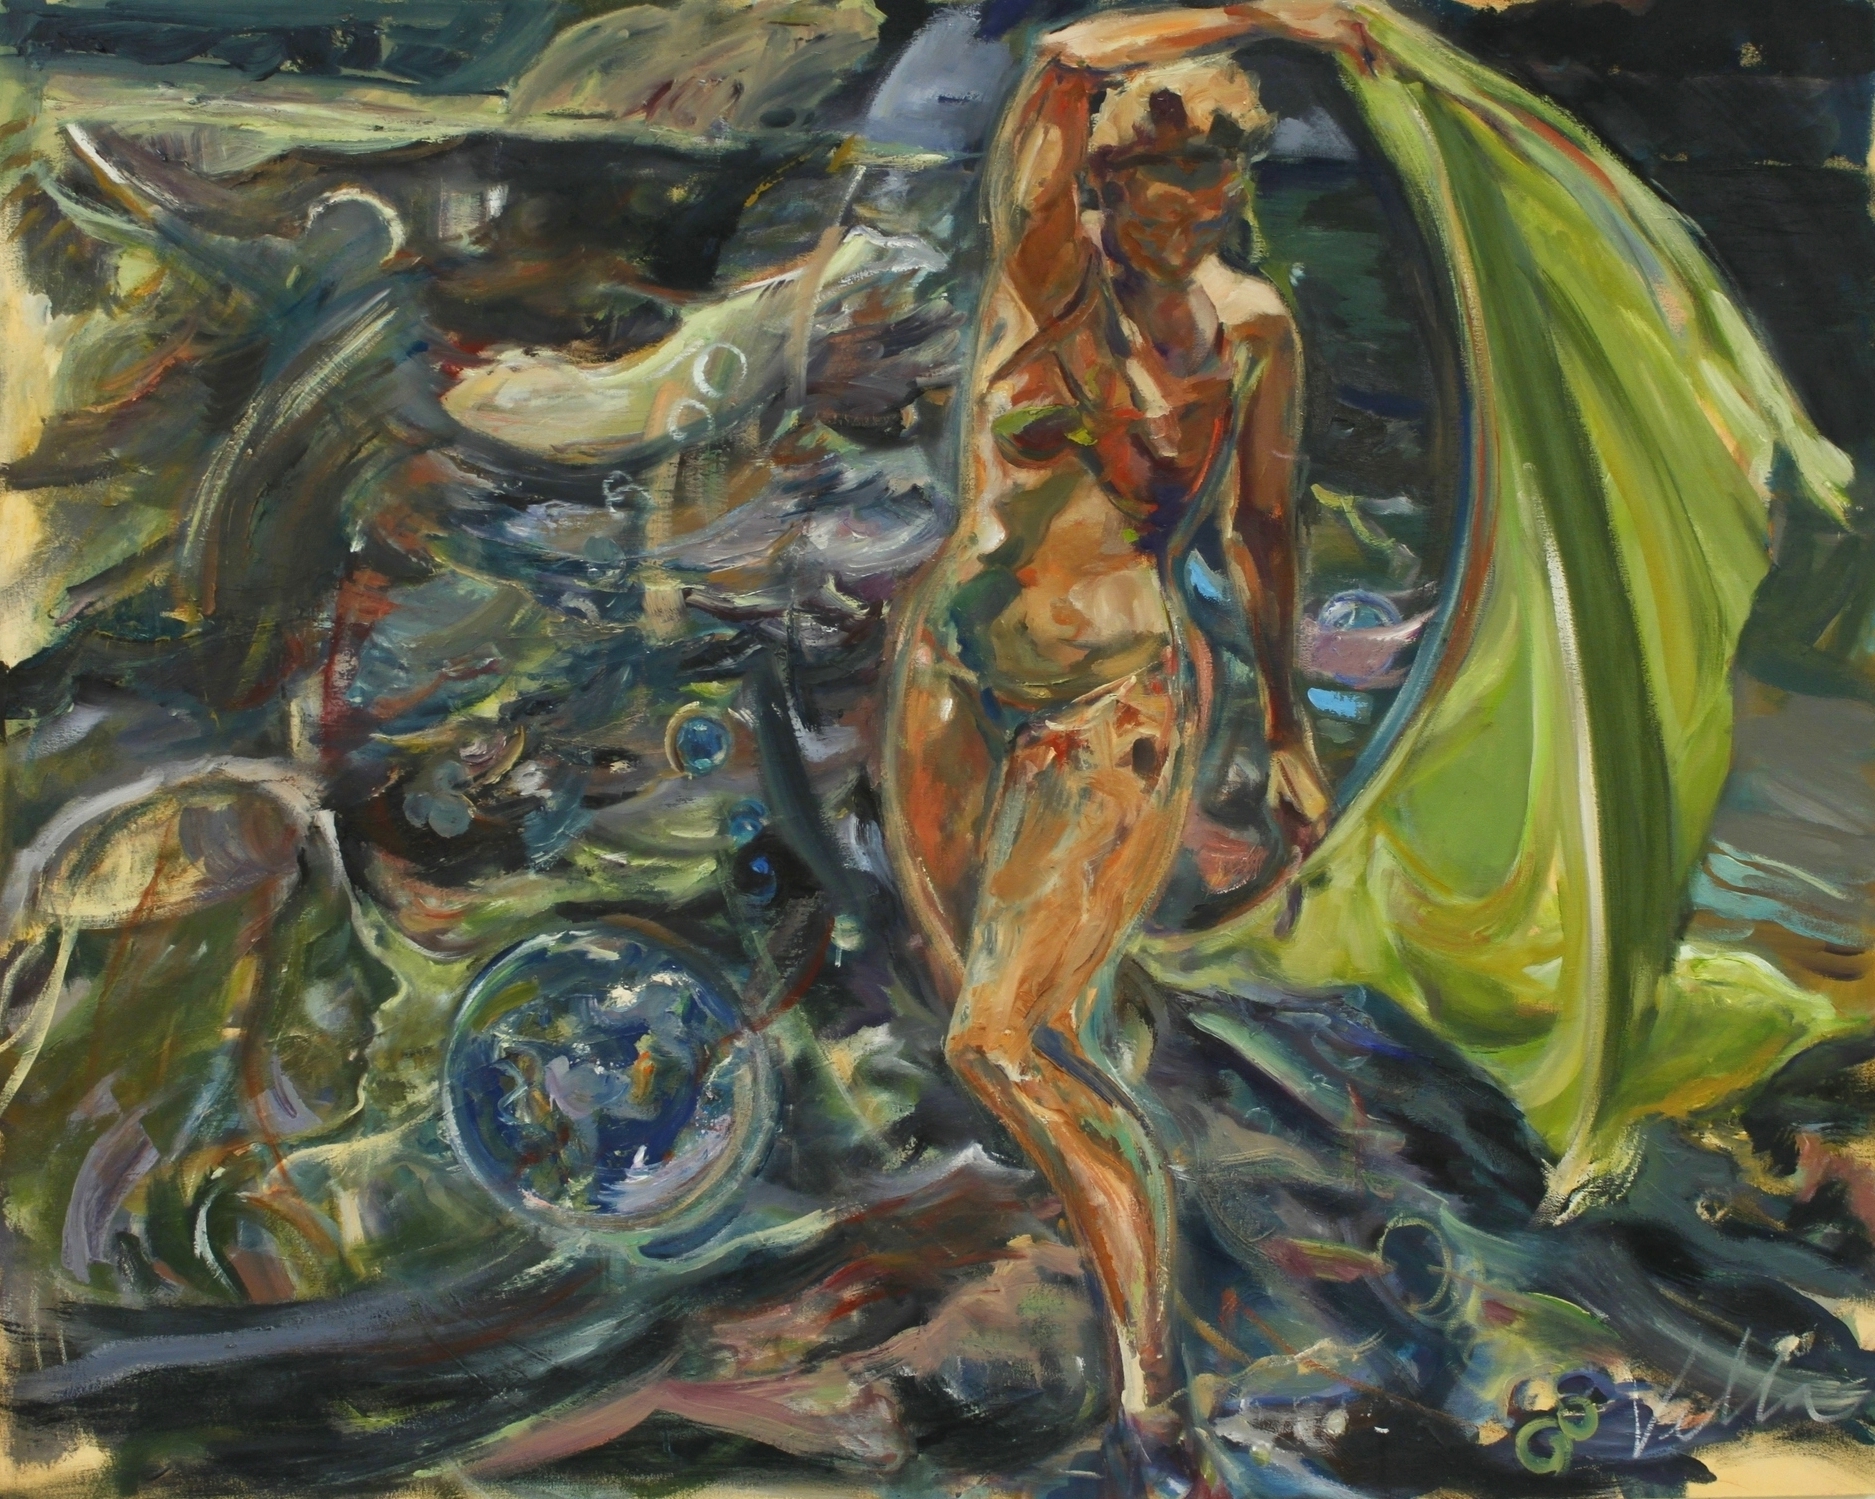 The Call of the Wind, 2014, oil on canvas, 48" x 60".